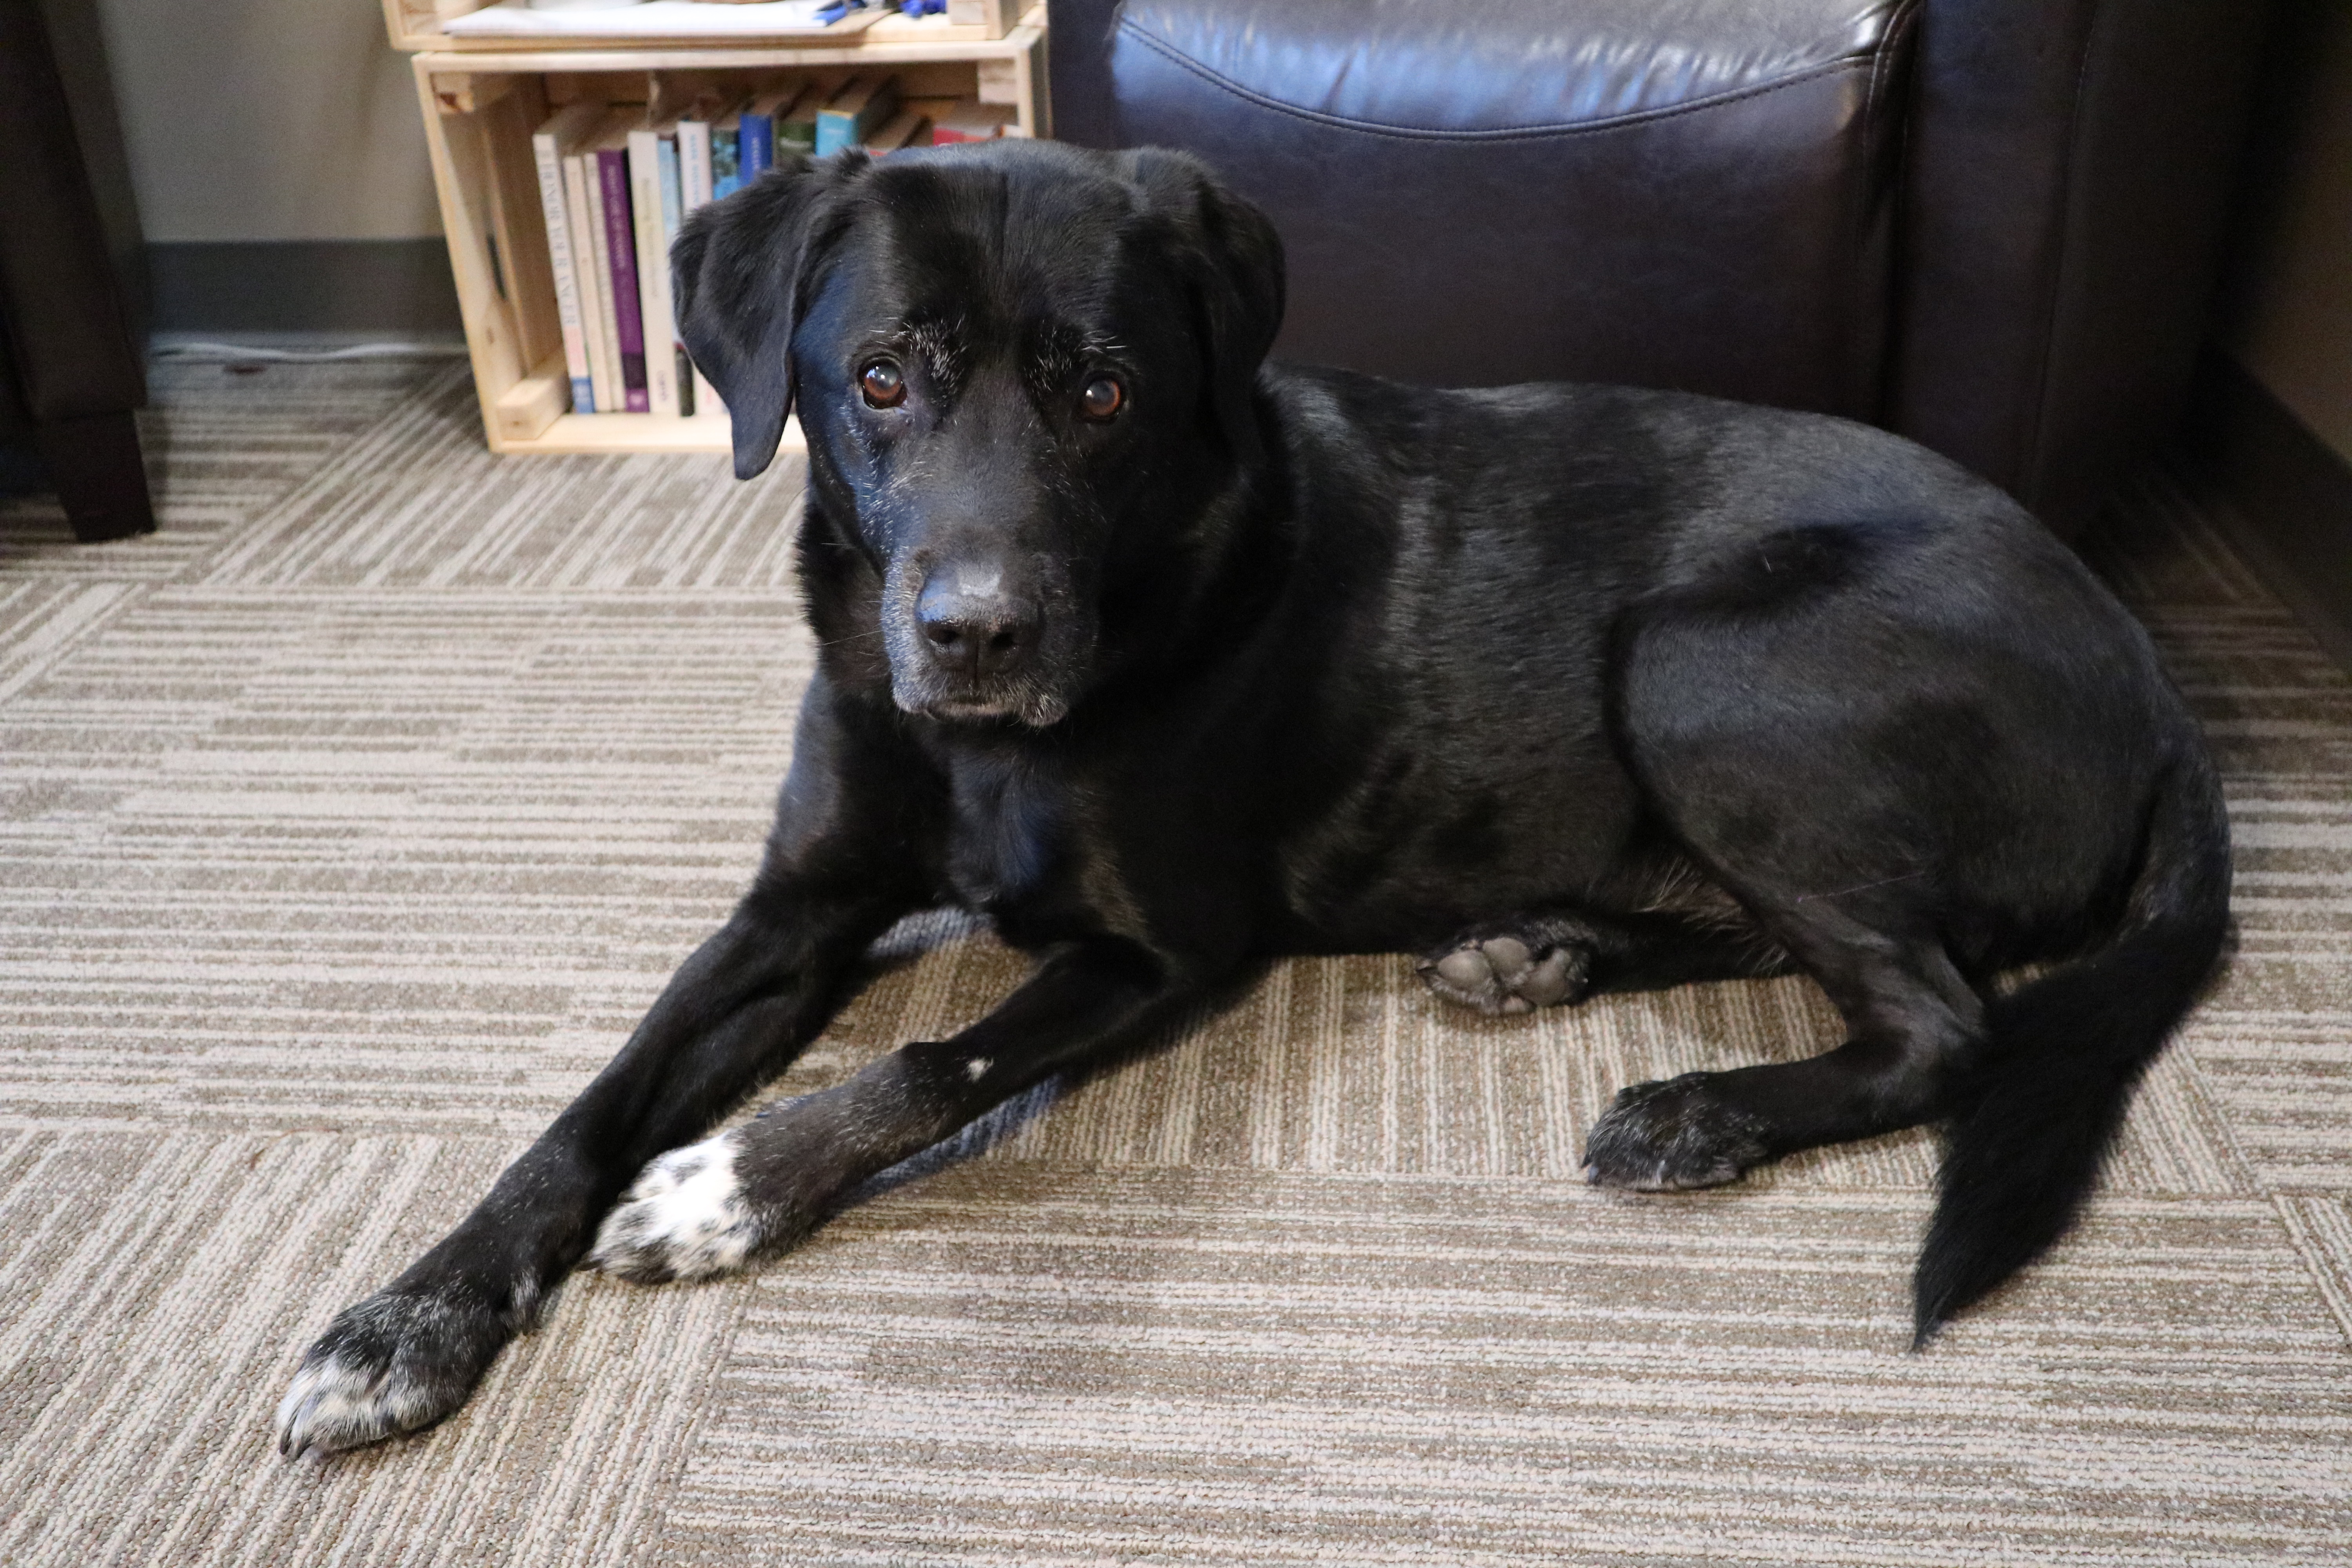 A photo of the Sexual Assault Centre of Edmonton's therapy dog, Nanuq, a gentle black labrador